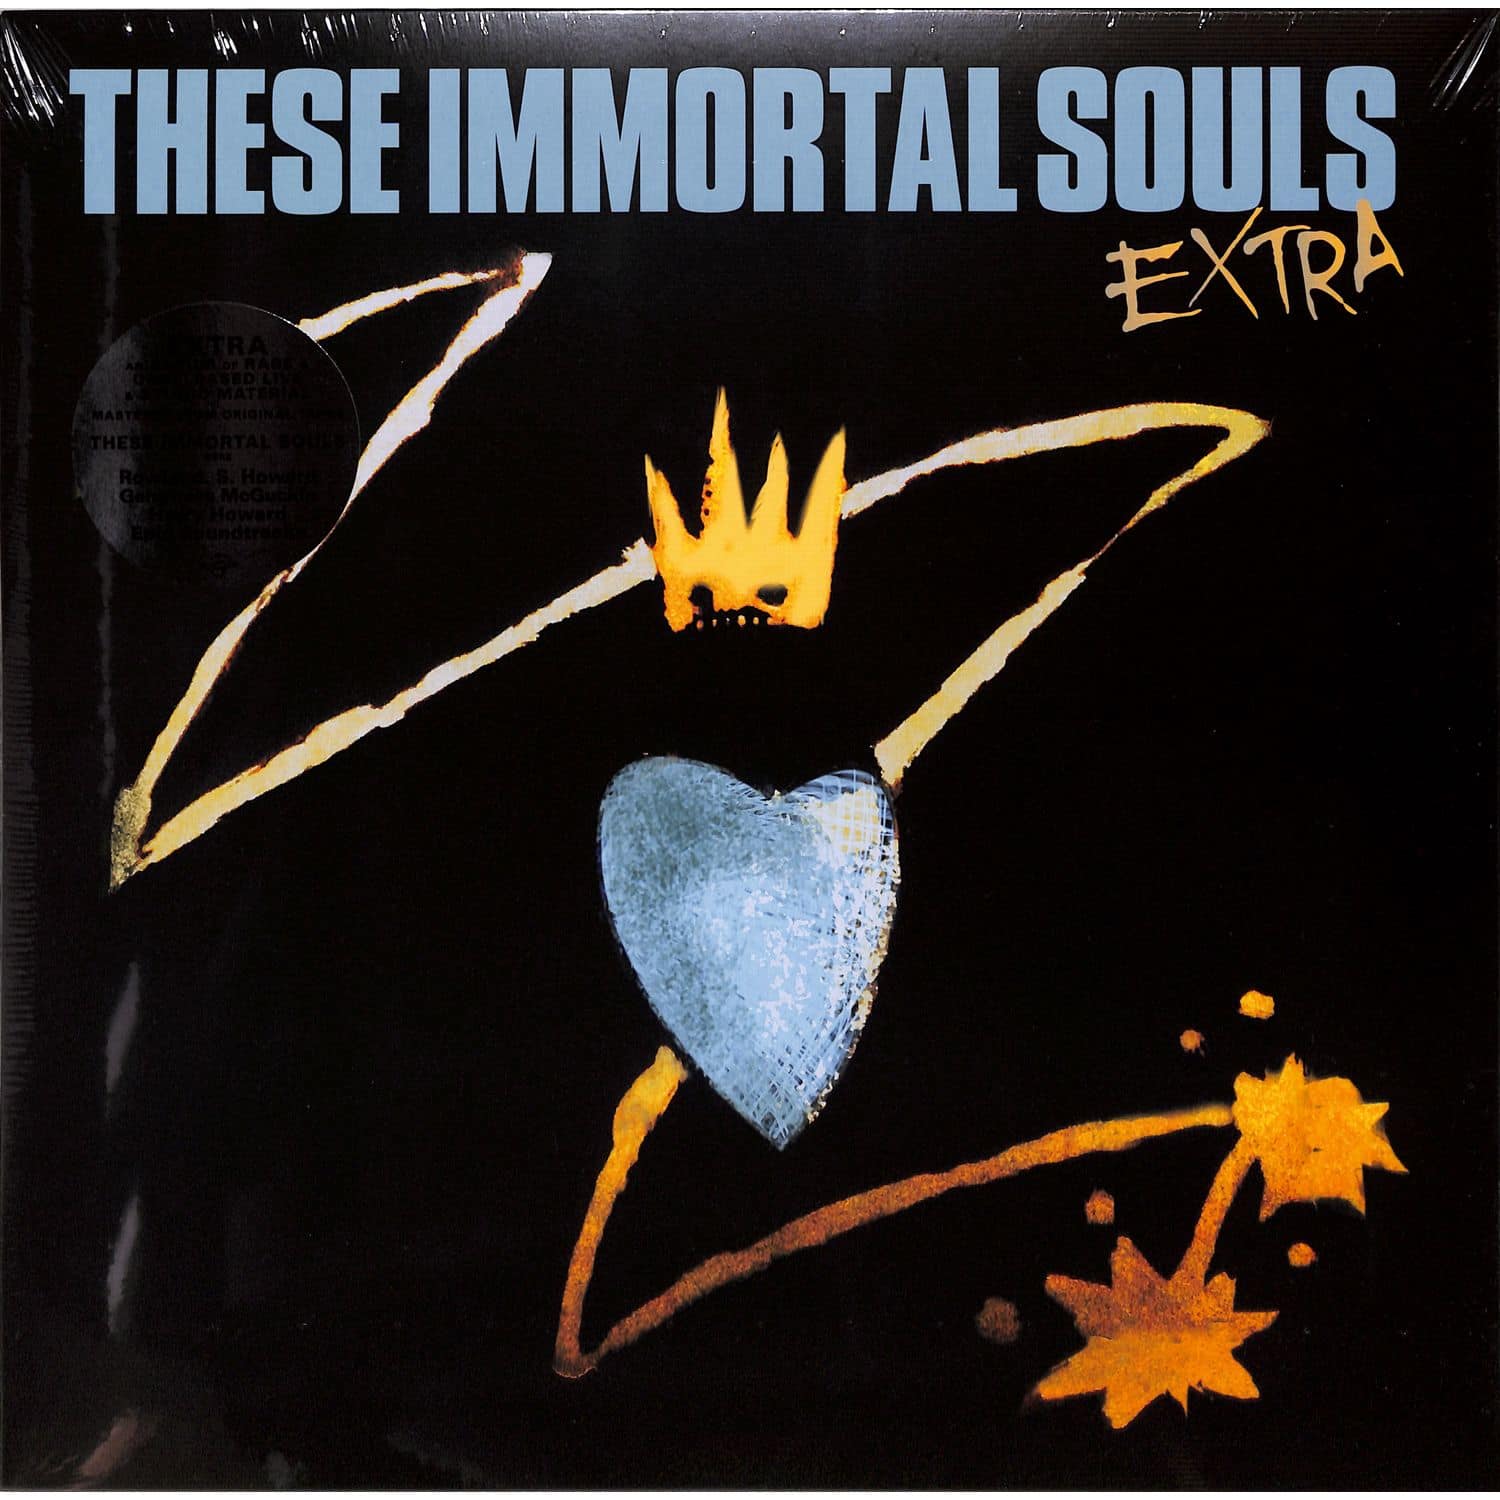 These Immortal Souls - EXTRA 